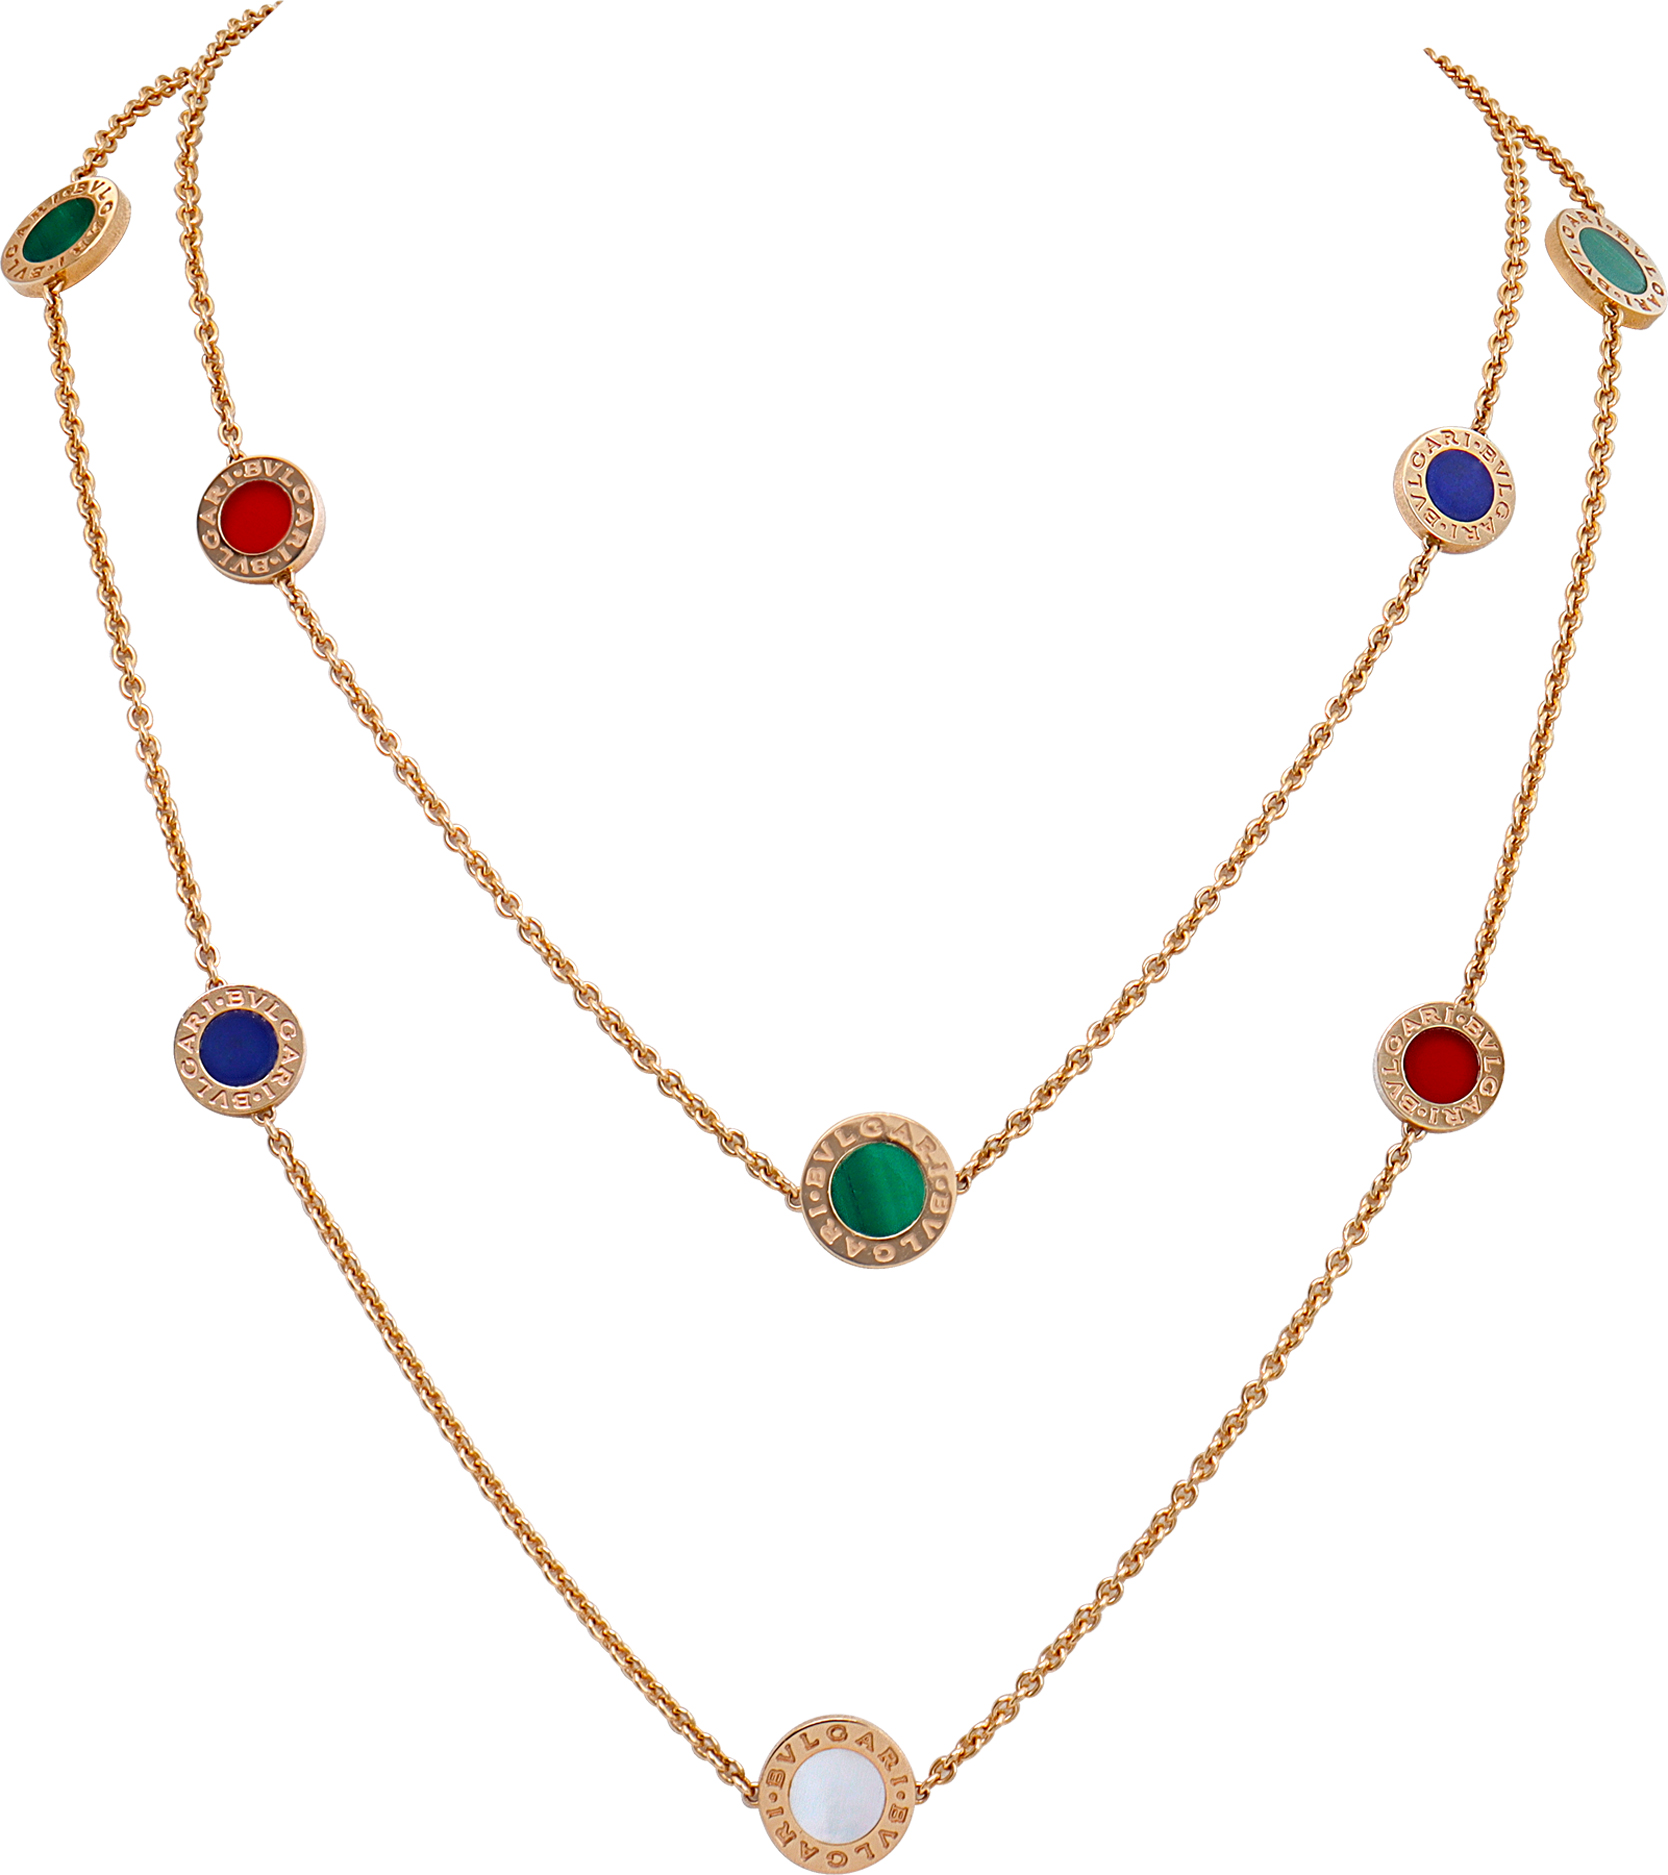 Bvlgari necklace 18k with carnelian, malachite, lapis lazuli and mother of pearl (Default)